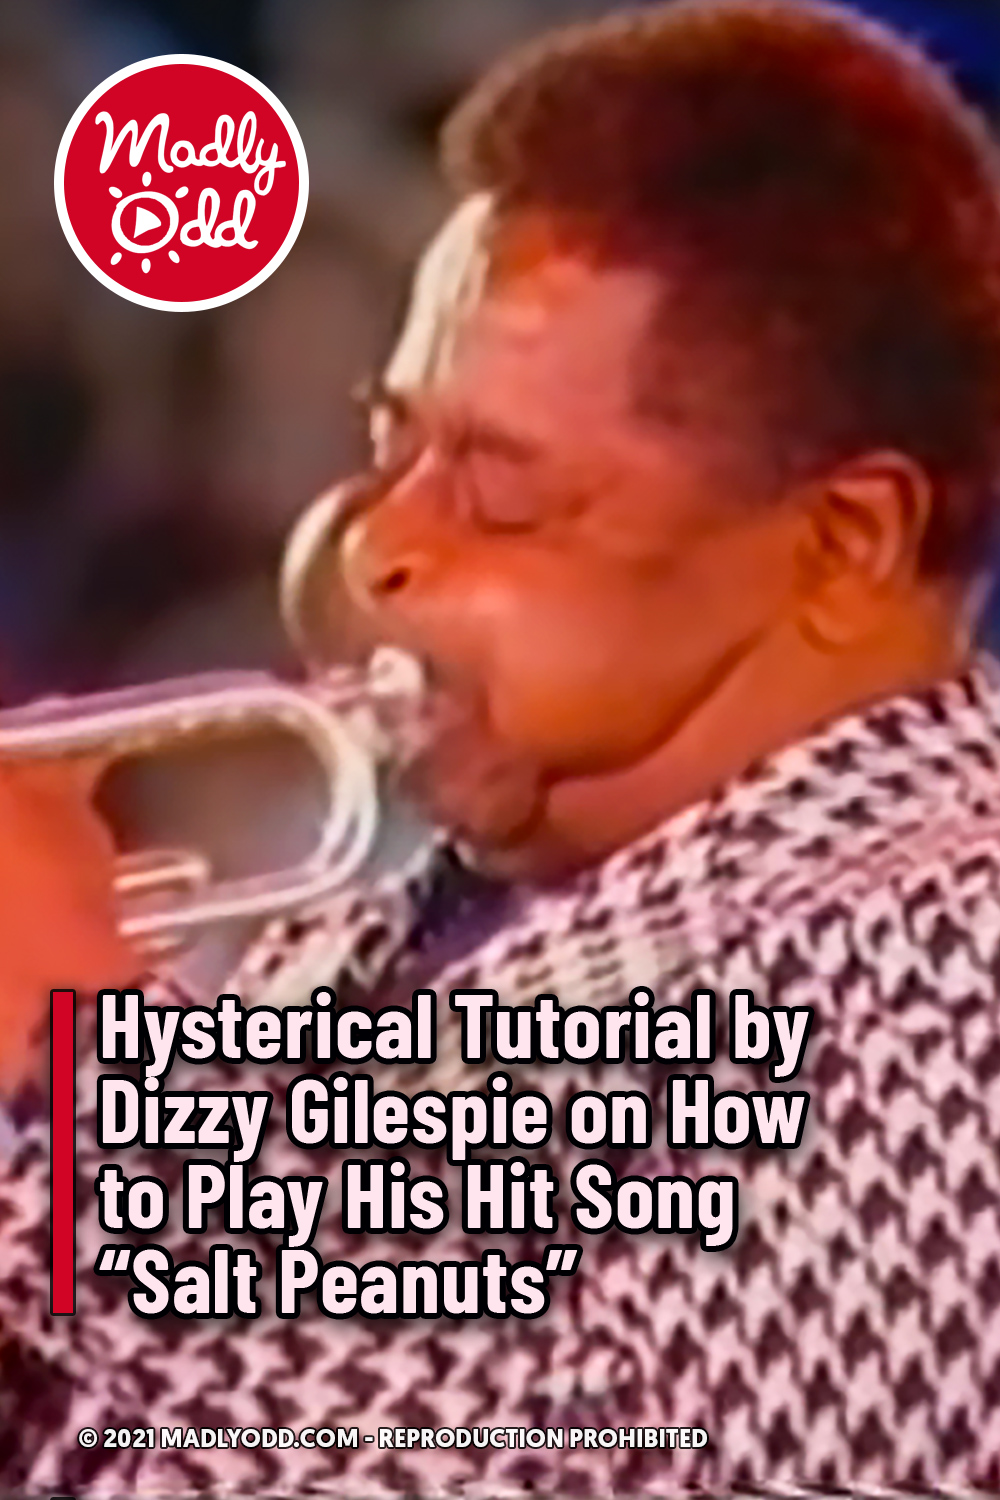 Hysterical Tutorial by Dizzy Gilespie on How to Play His Hit Song “Salt Peanuts”